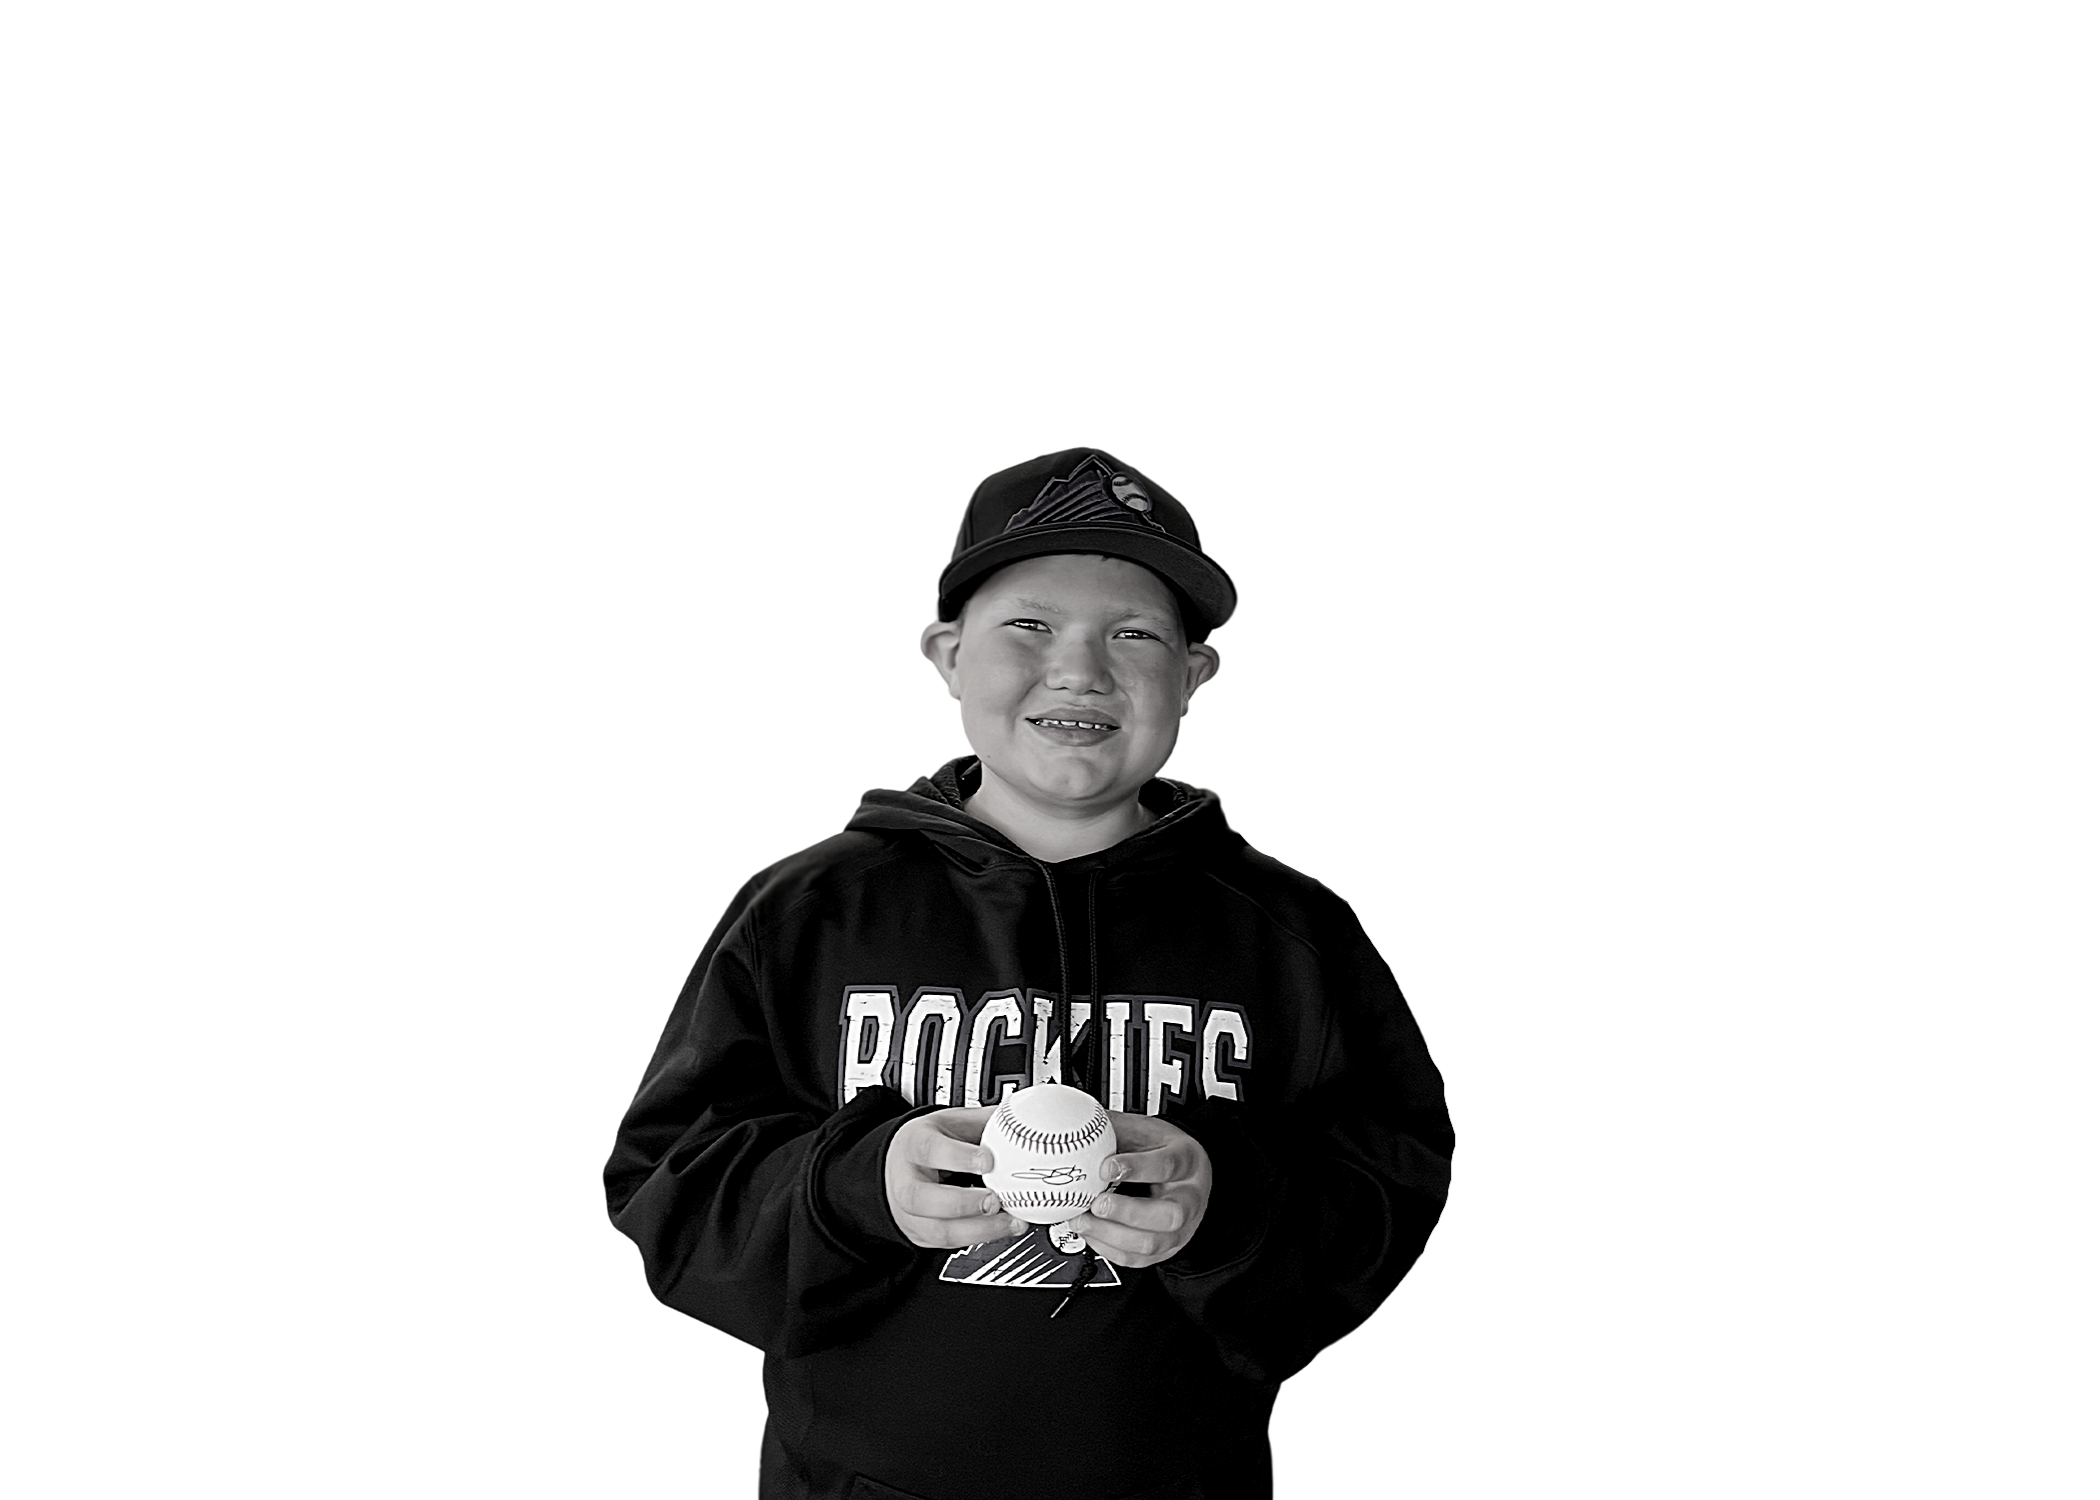 Corbin holding a baseball and smiling